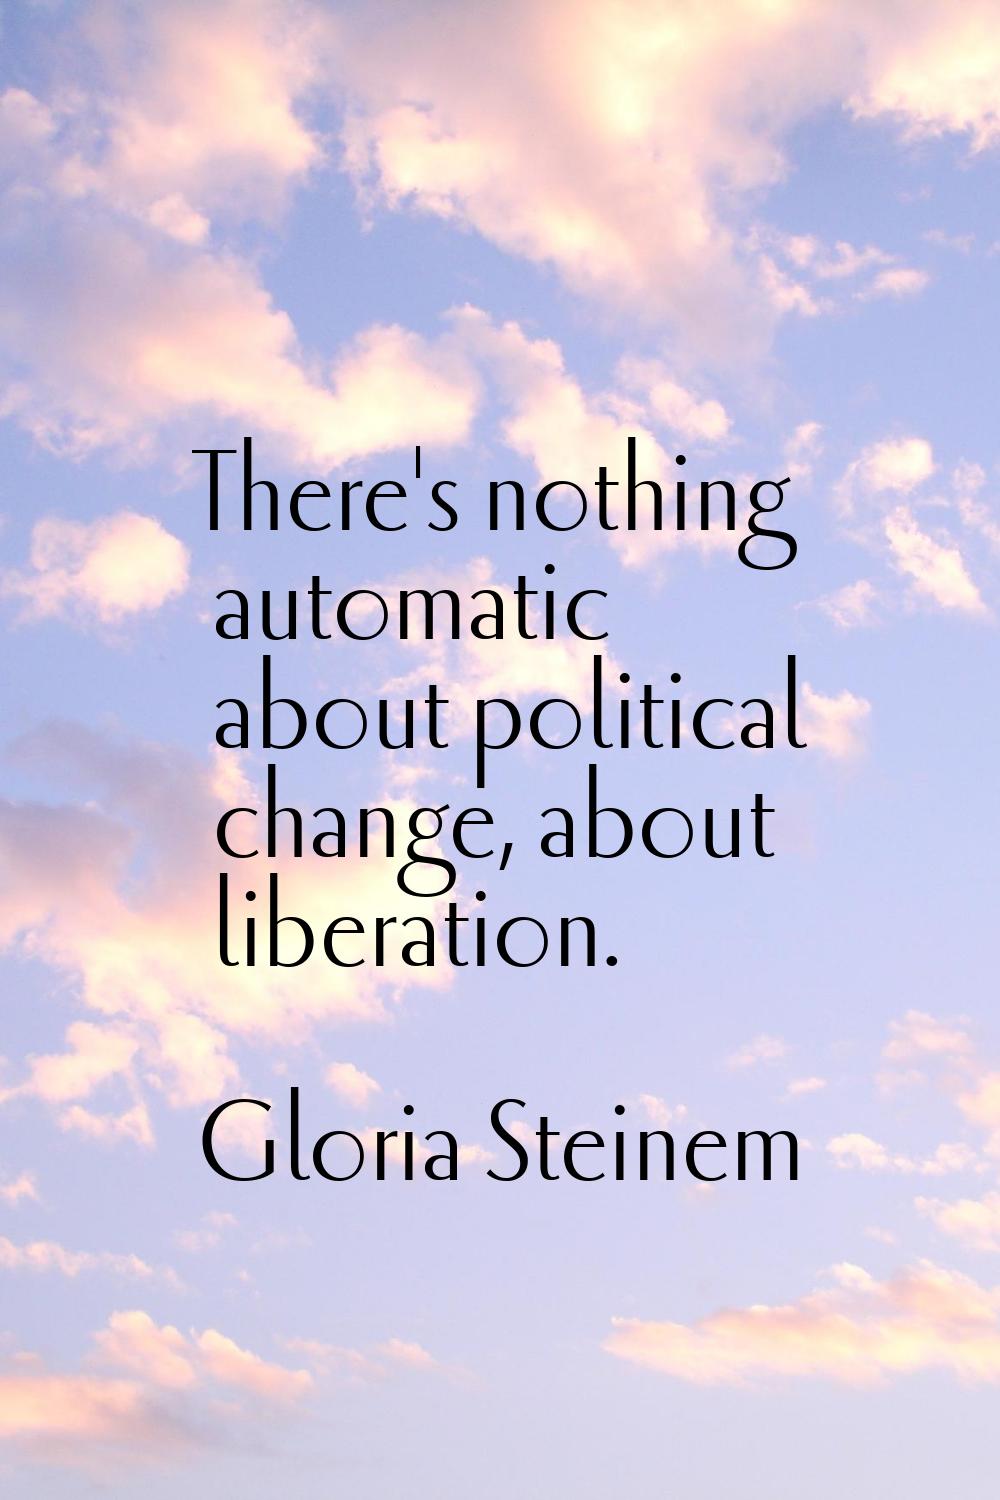 There's nothing automatic about political change, about liberation.